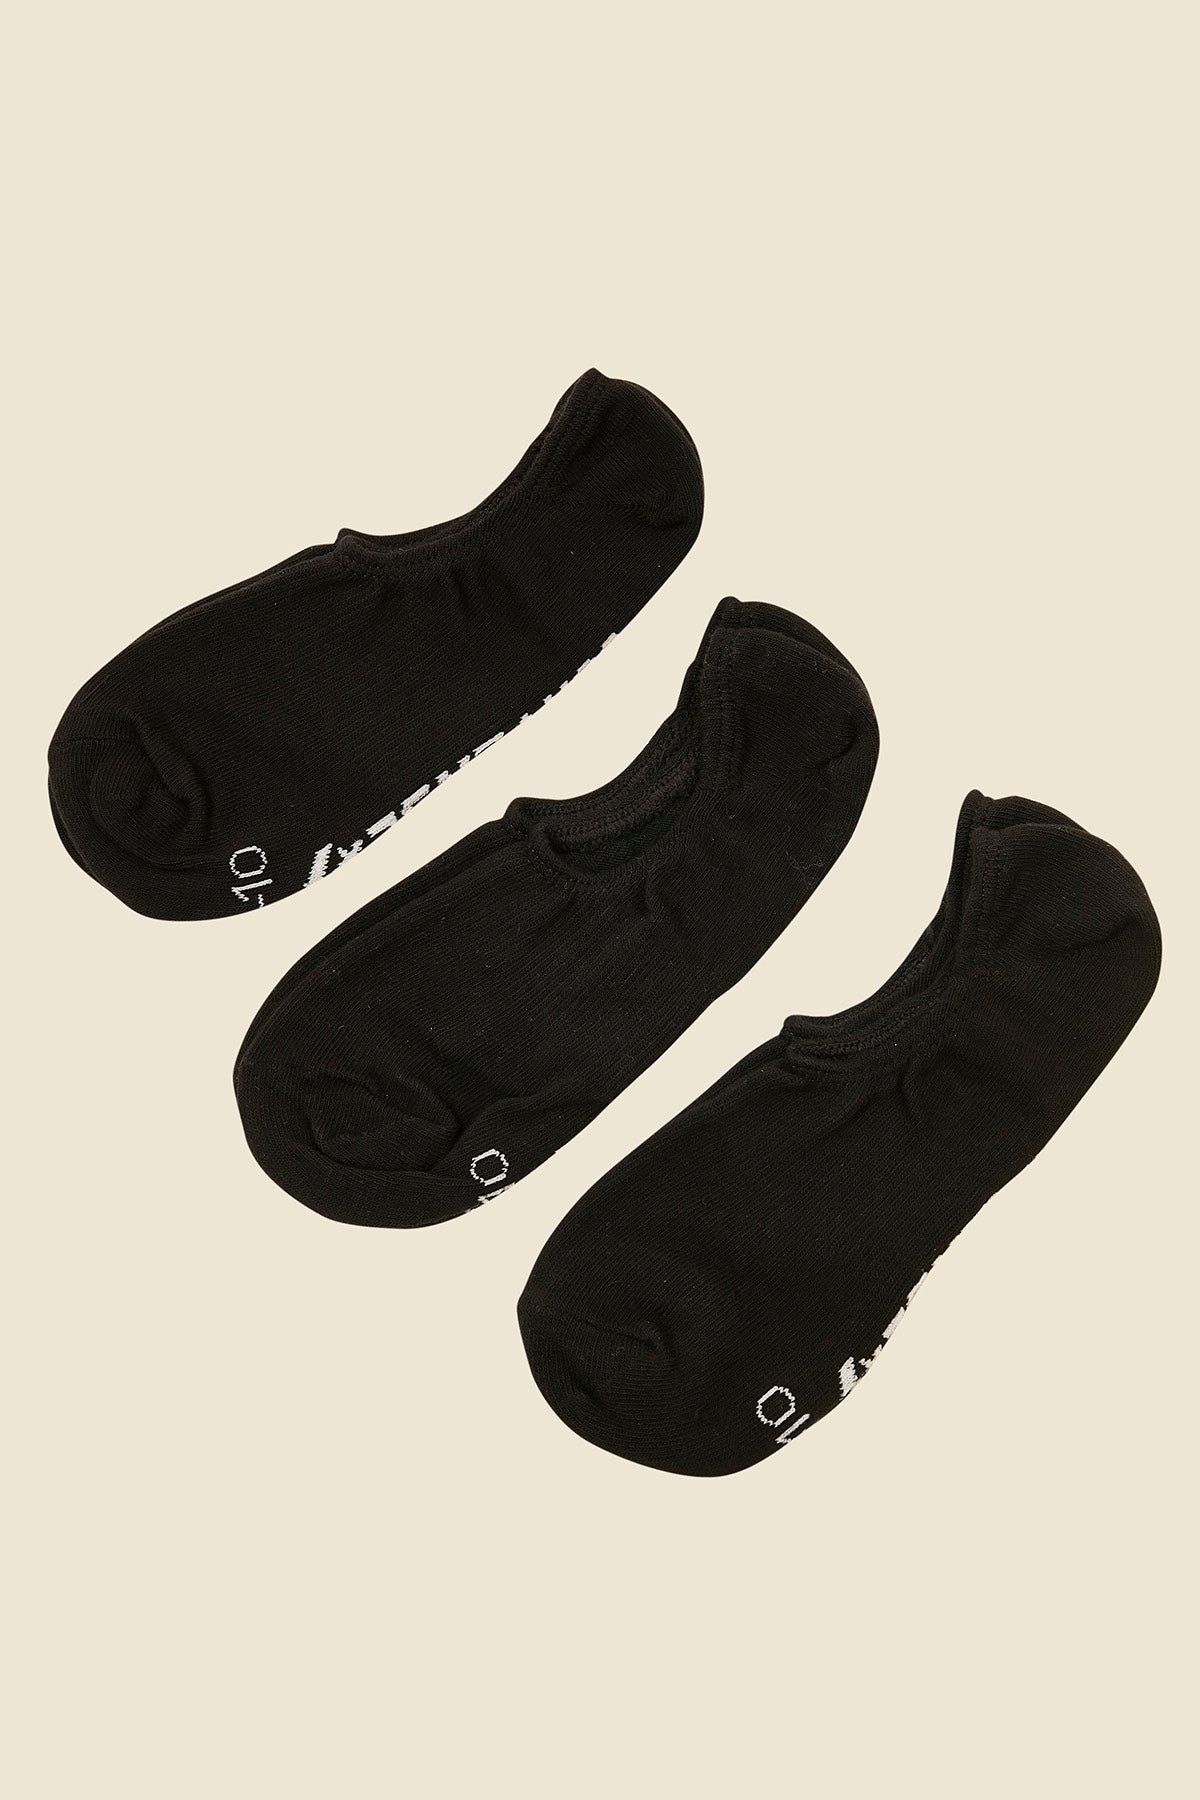 Converse Invisible Sock 3 Pack Black